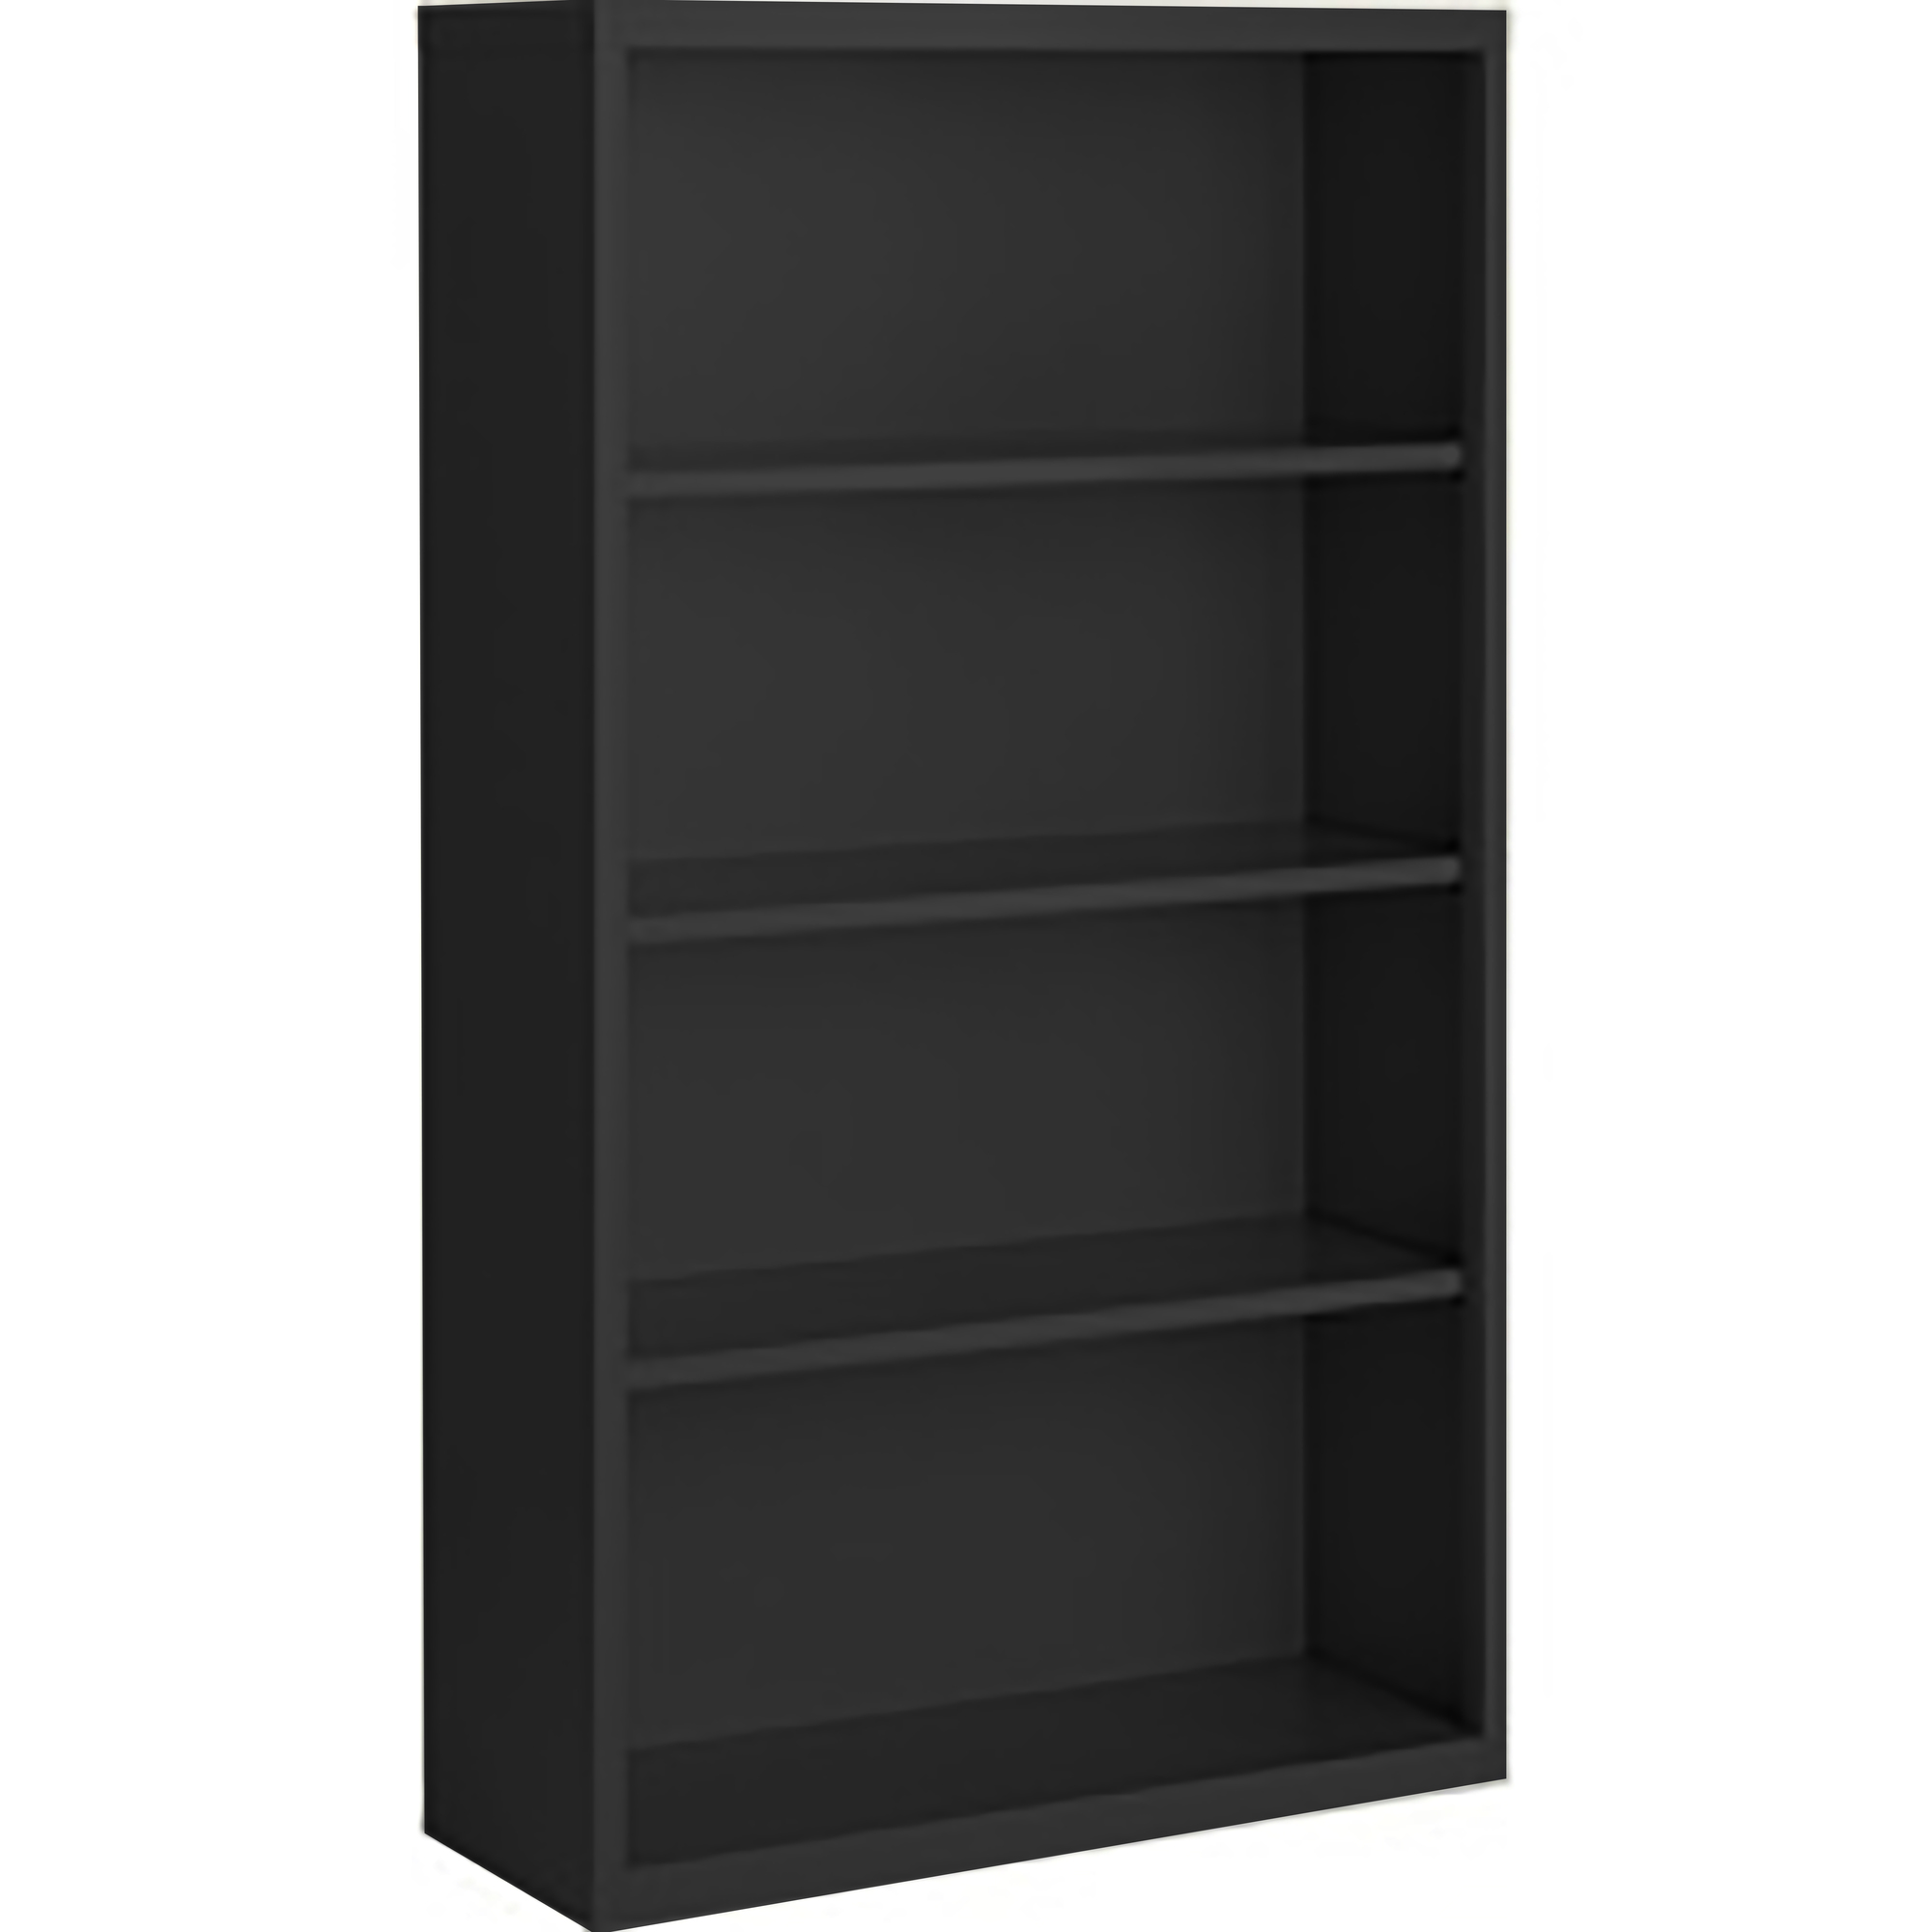 Steel Cabinets USA, 36Inchx18Inchx52Inch Black Bookcase Steel Fully Assembled, Height 52 in, Shelves (qty.) 4, Material Steel, Model BCA-365218-B